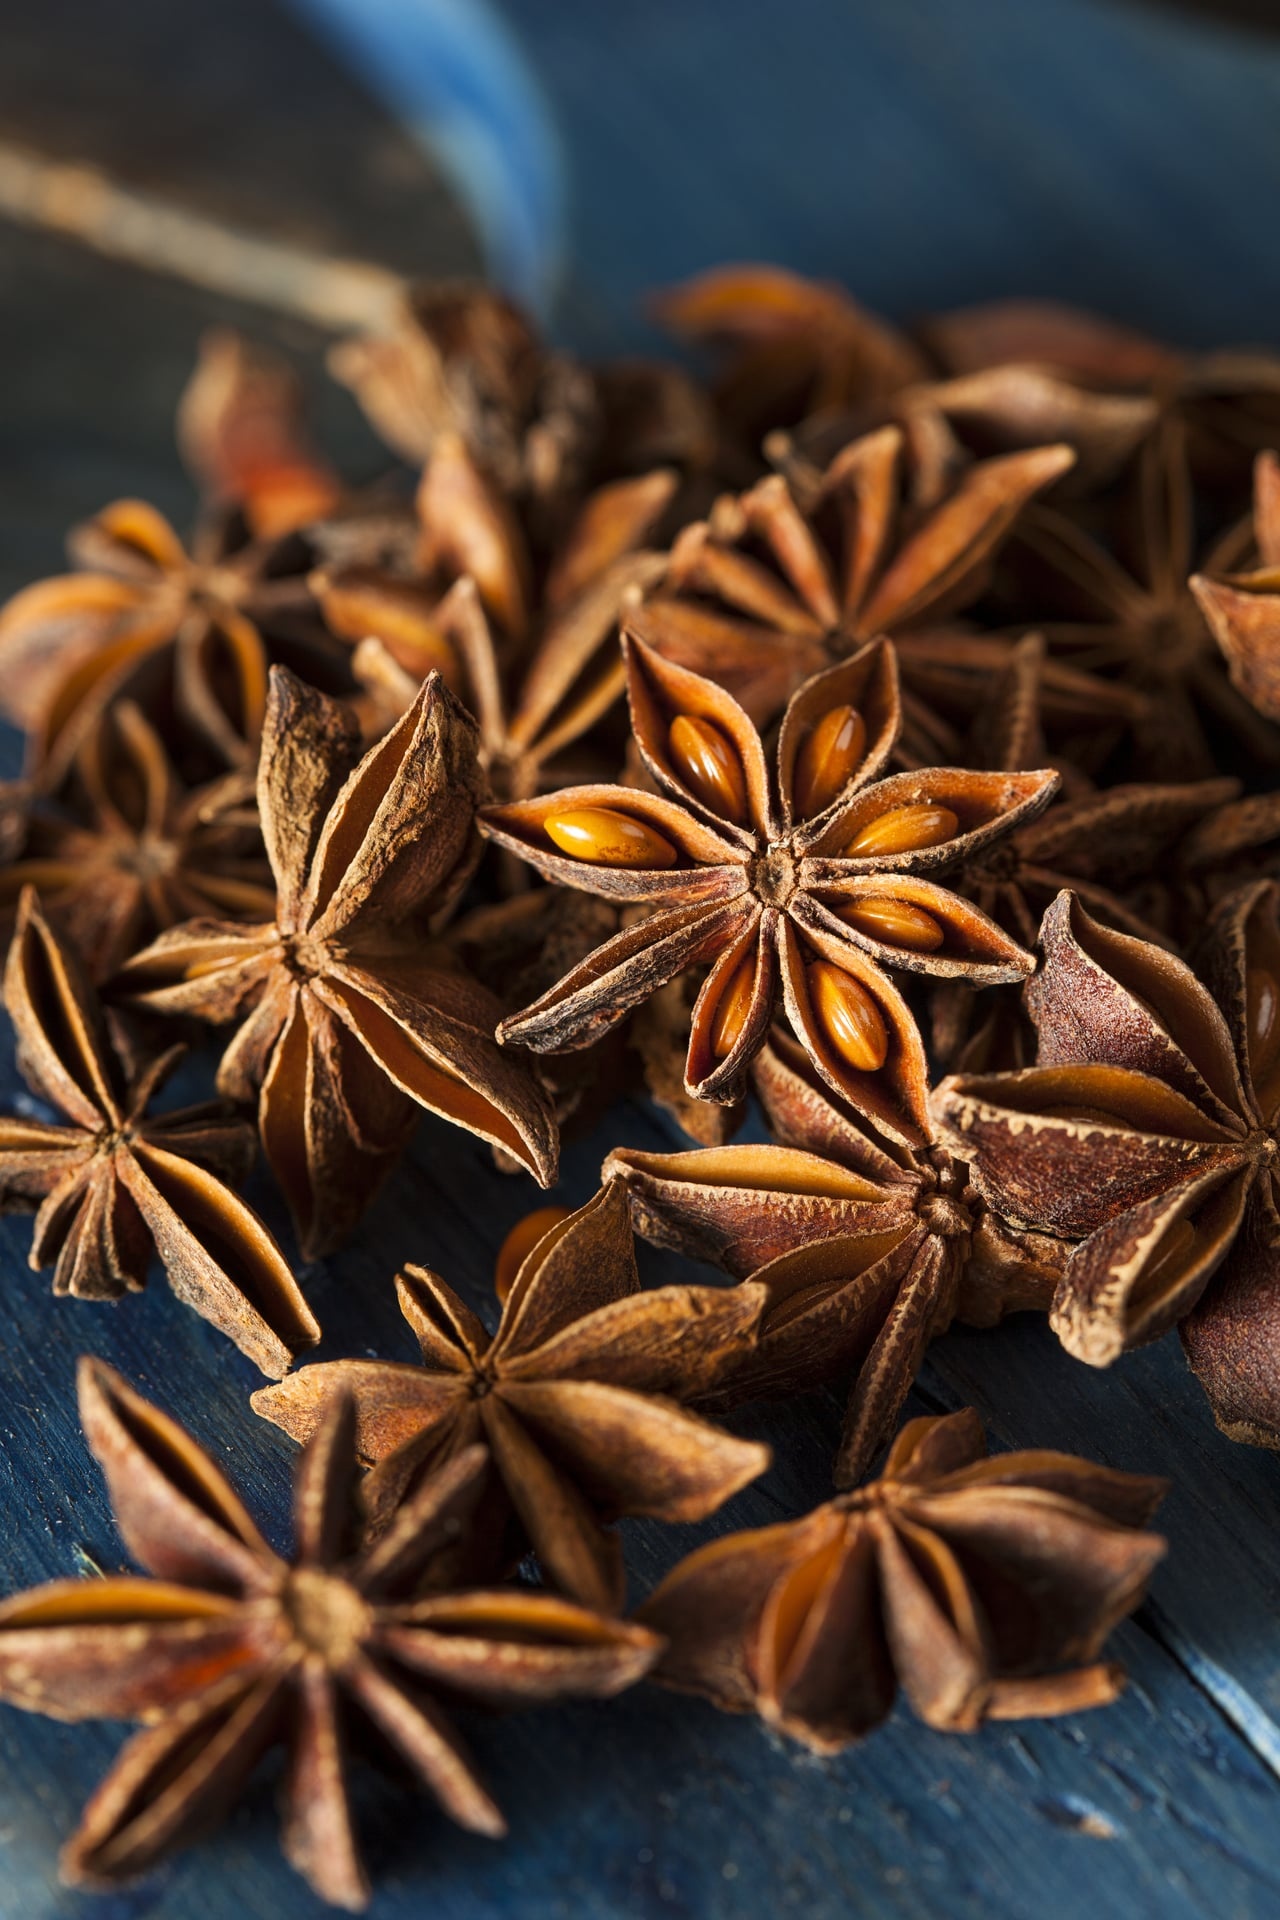 Anise Plant, Weight and measure, Star anise bounty, Culinary gold, 1280x1920 HD Handy